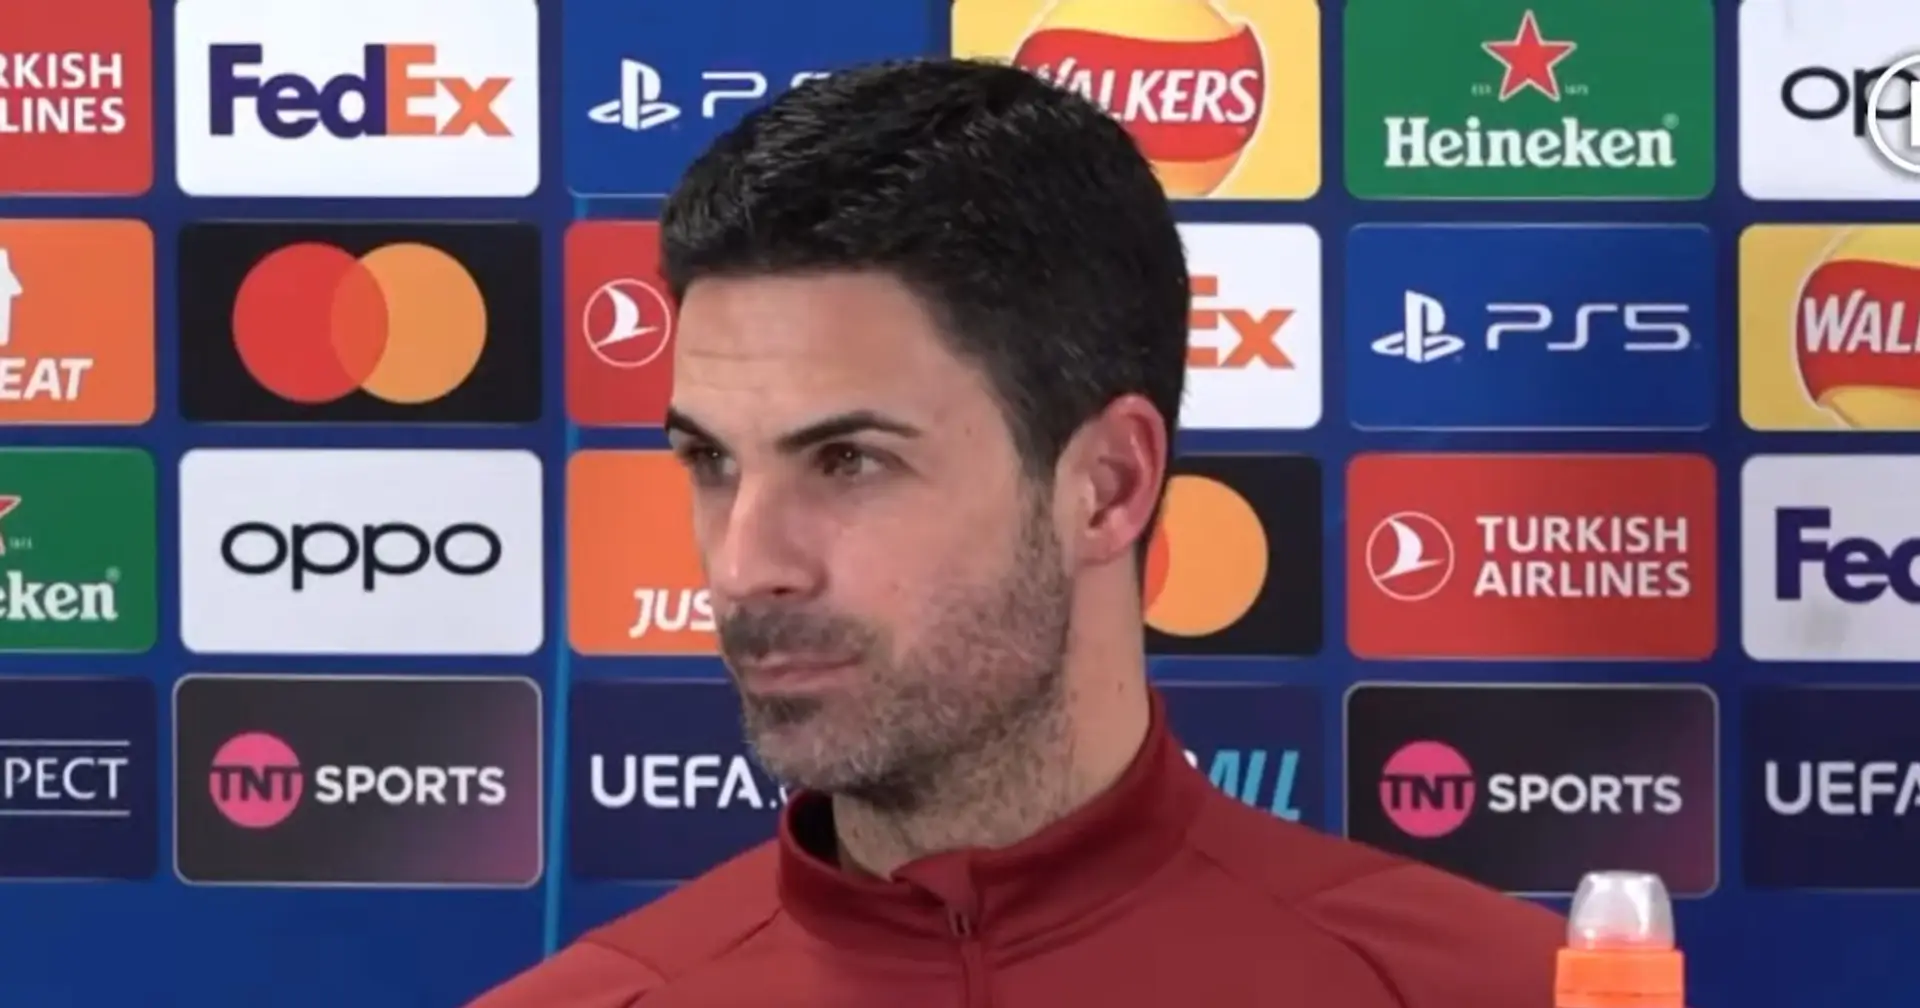 'The ambition rises': Arteta speaks out as Arsenal go top of the table and get close to Champions League quarter-finals